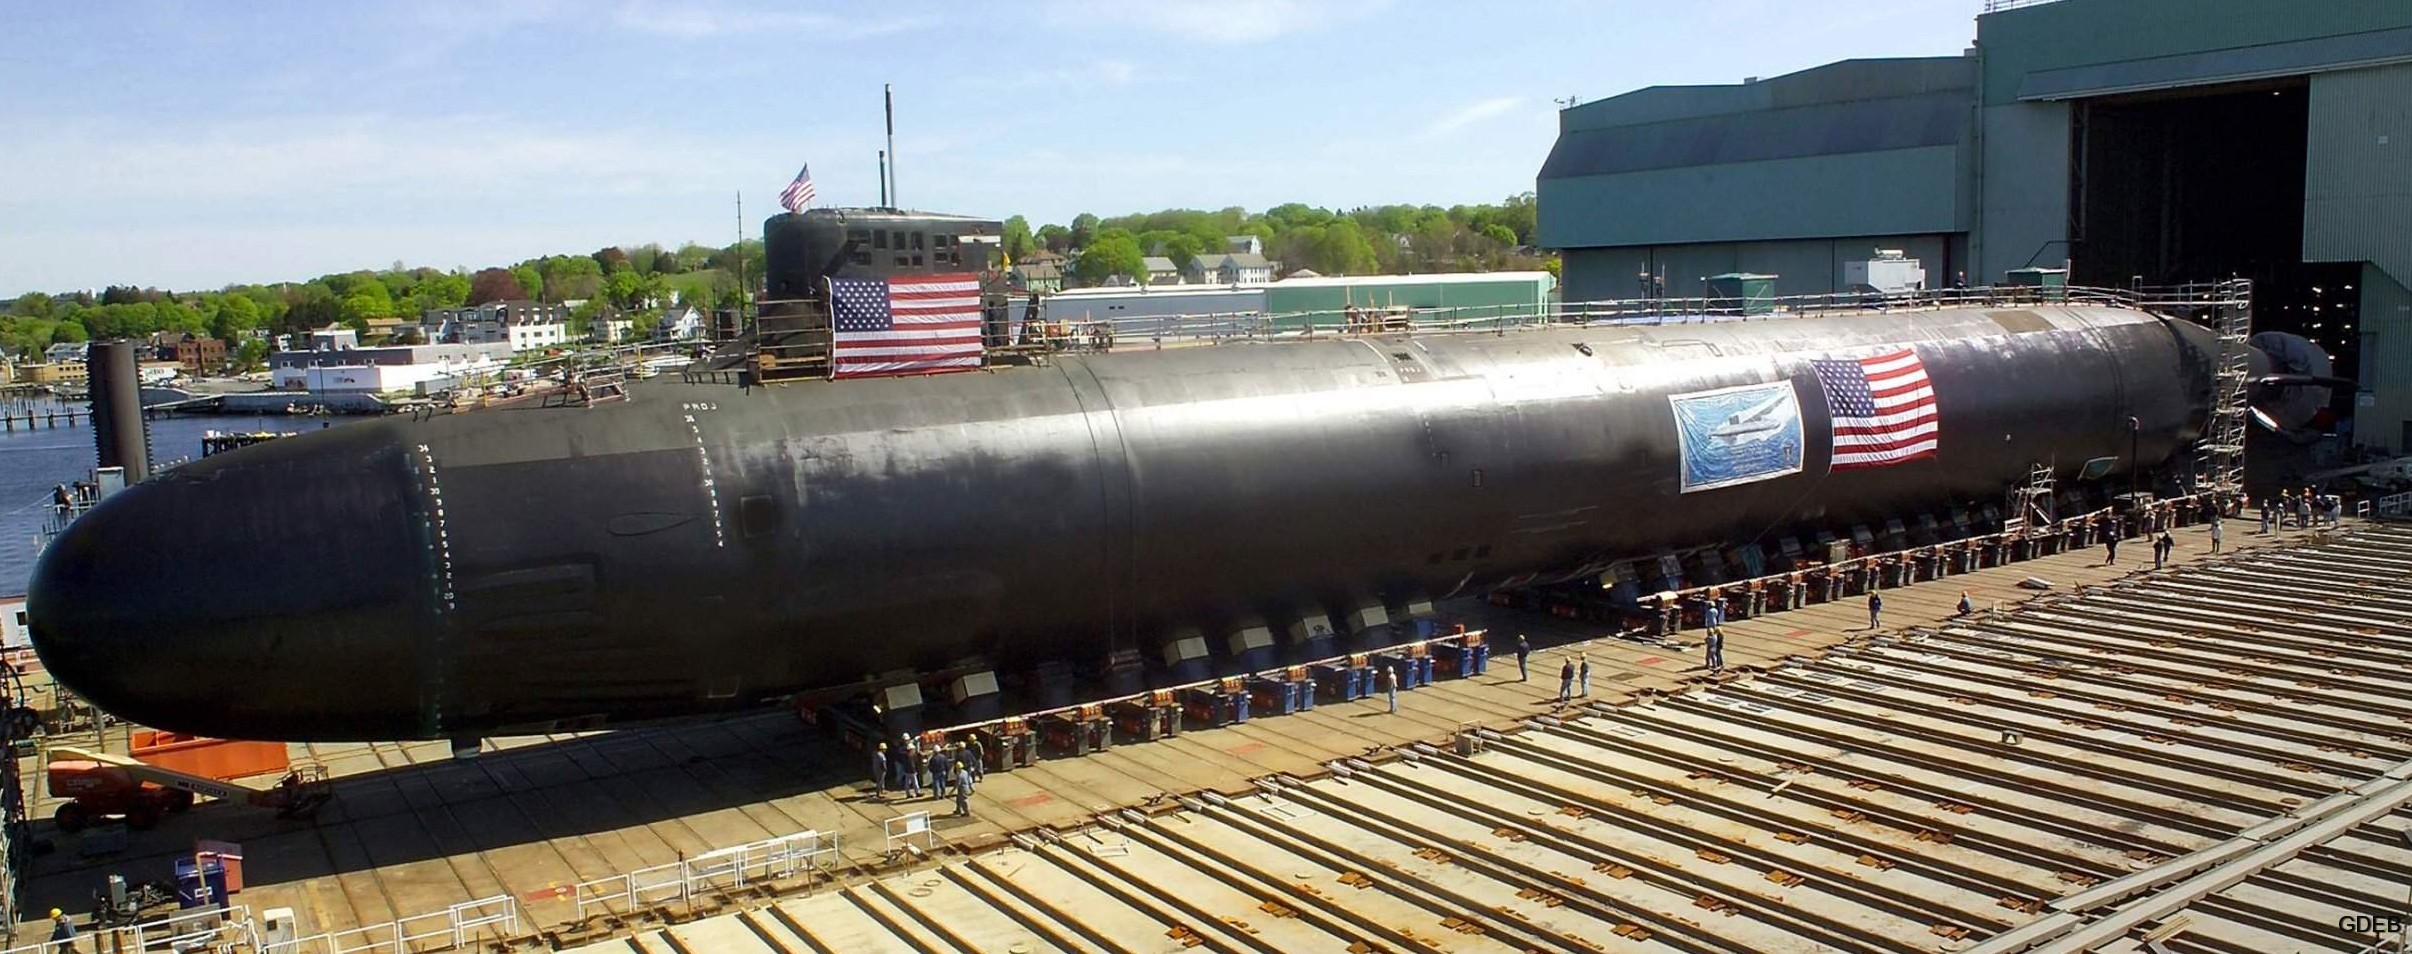 ssn-23 uss jimmy carter seawolf class attack submarine us navy roll out general dynamics electric boat groton connecticut 07